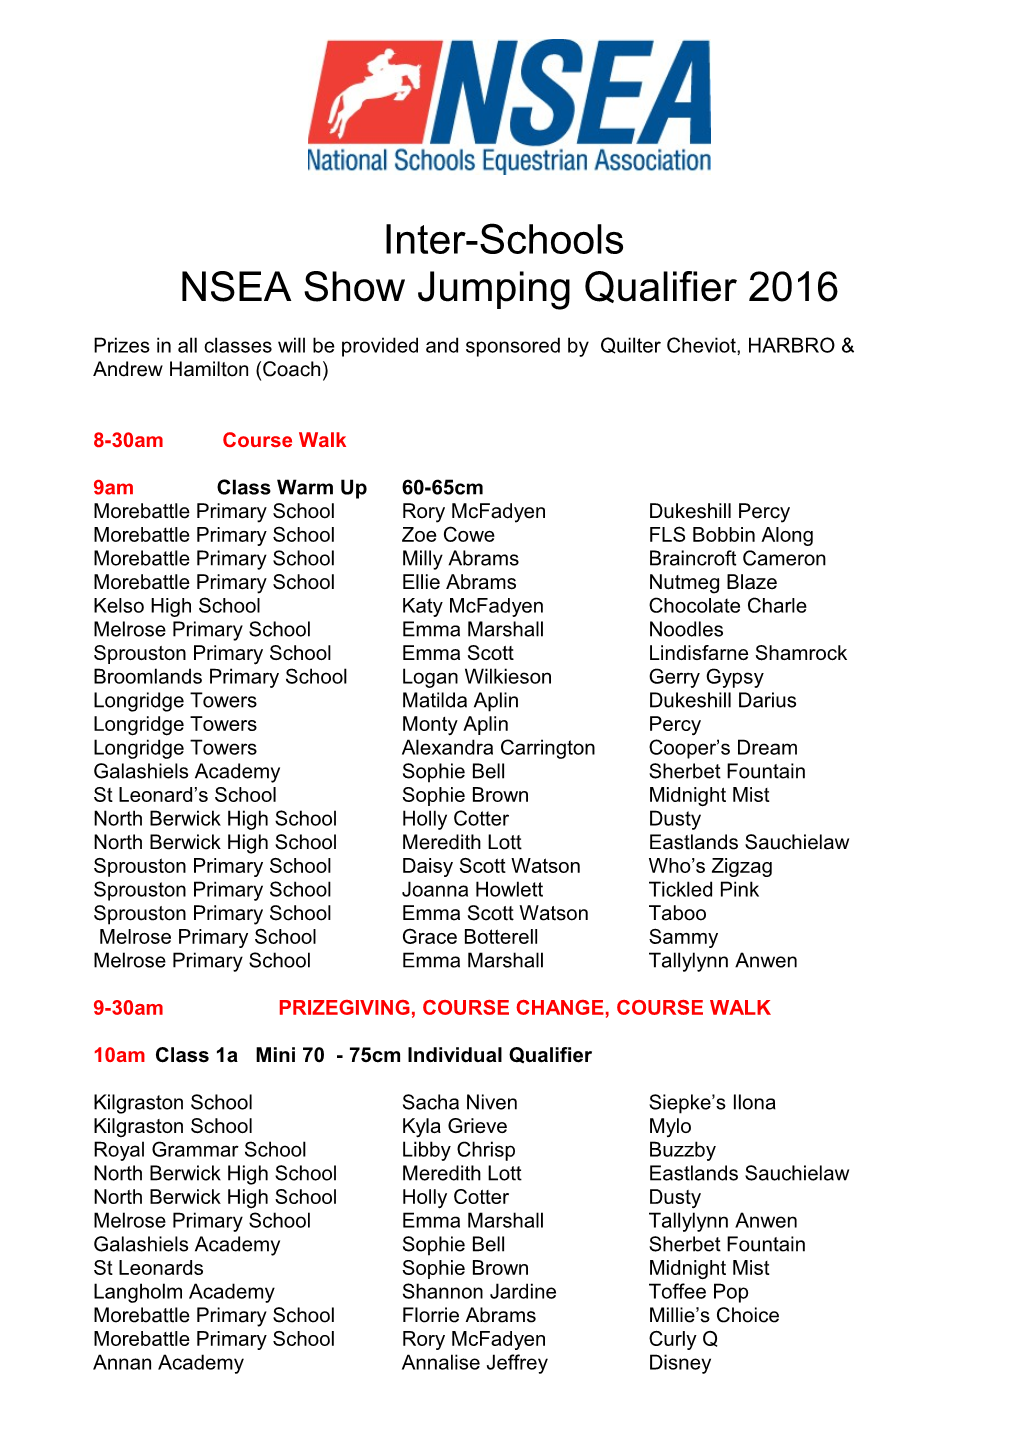 Inter-Schools NSEA Show Jumping Qualifier 2016